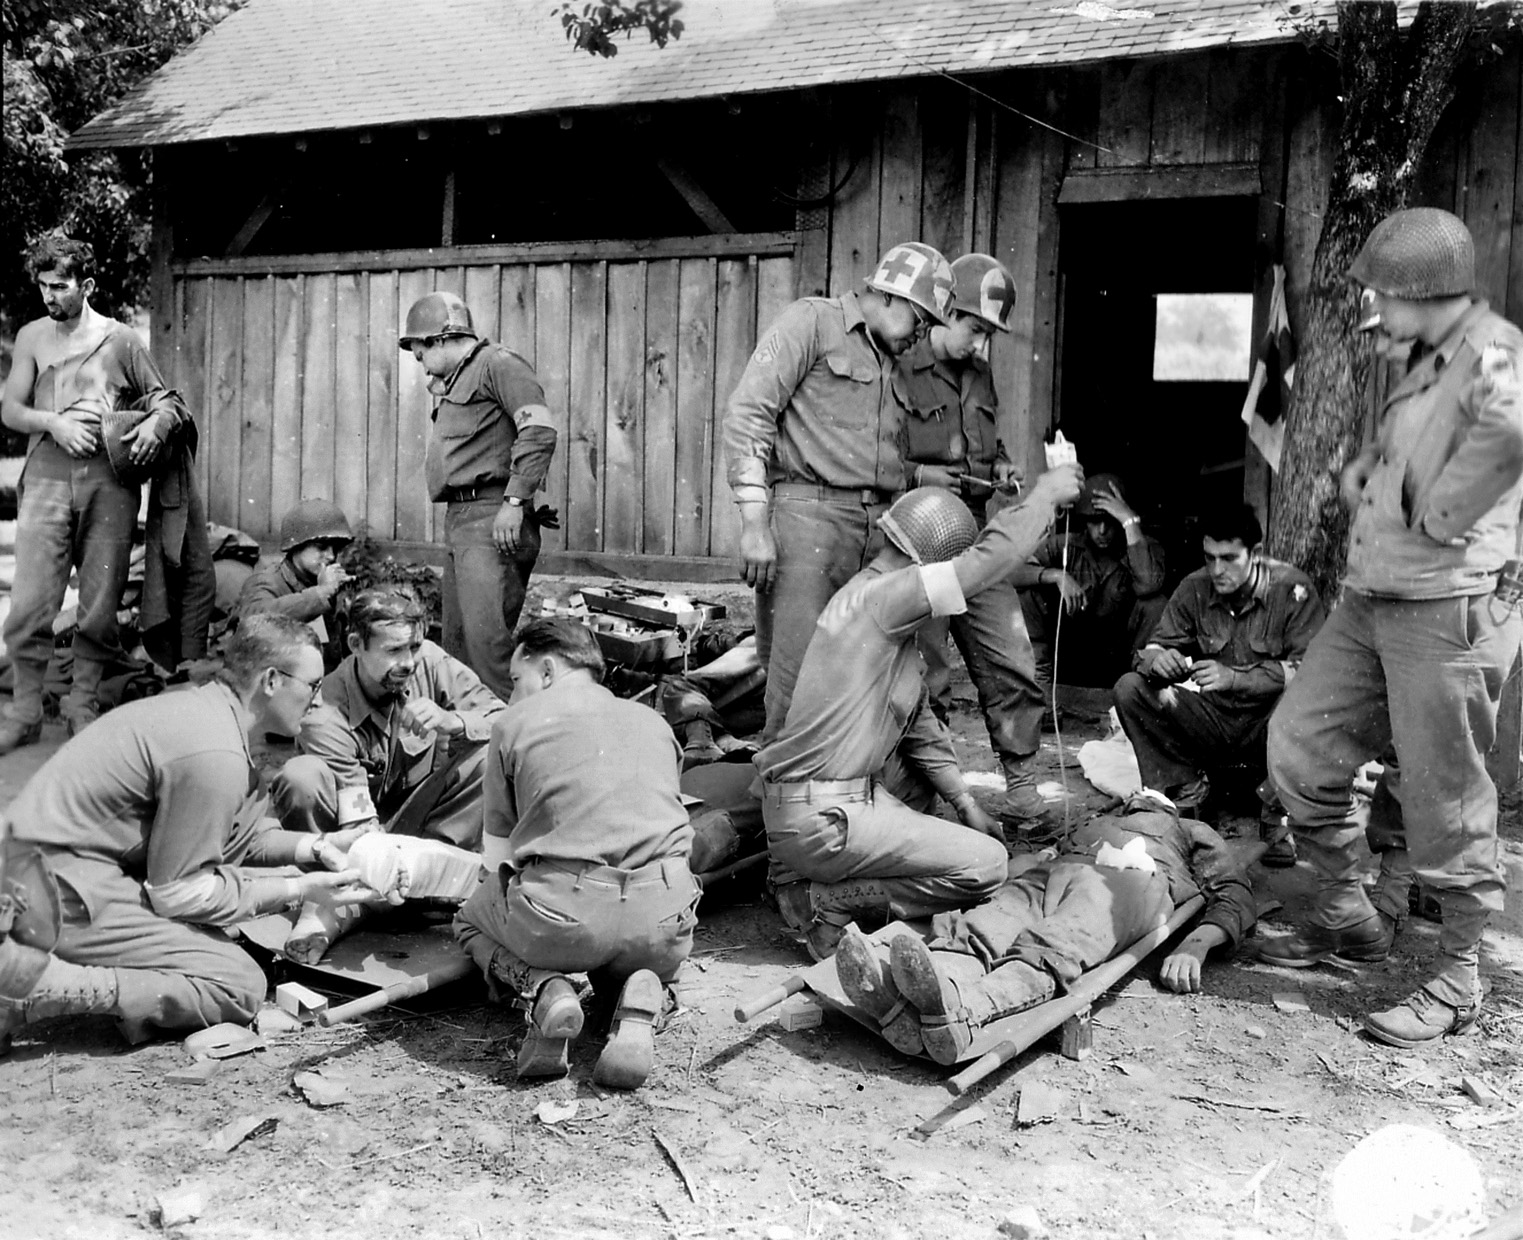 A leg splint is placed on a soldier (left) at a forward medical aid station set up near Mortain on August 12 while plasma is given to a soldier at right who suffered a head wound. 